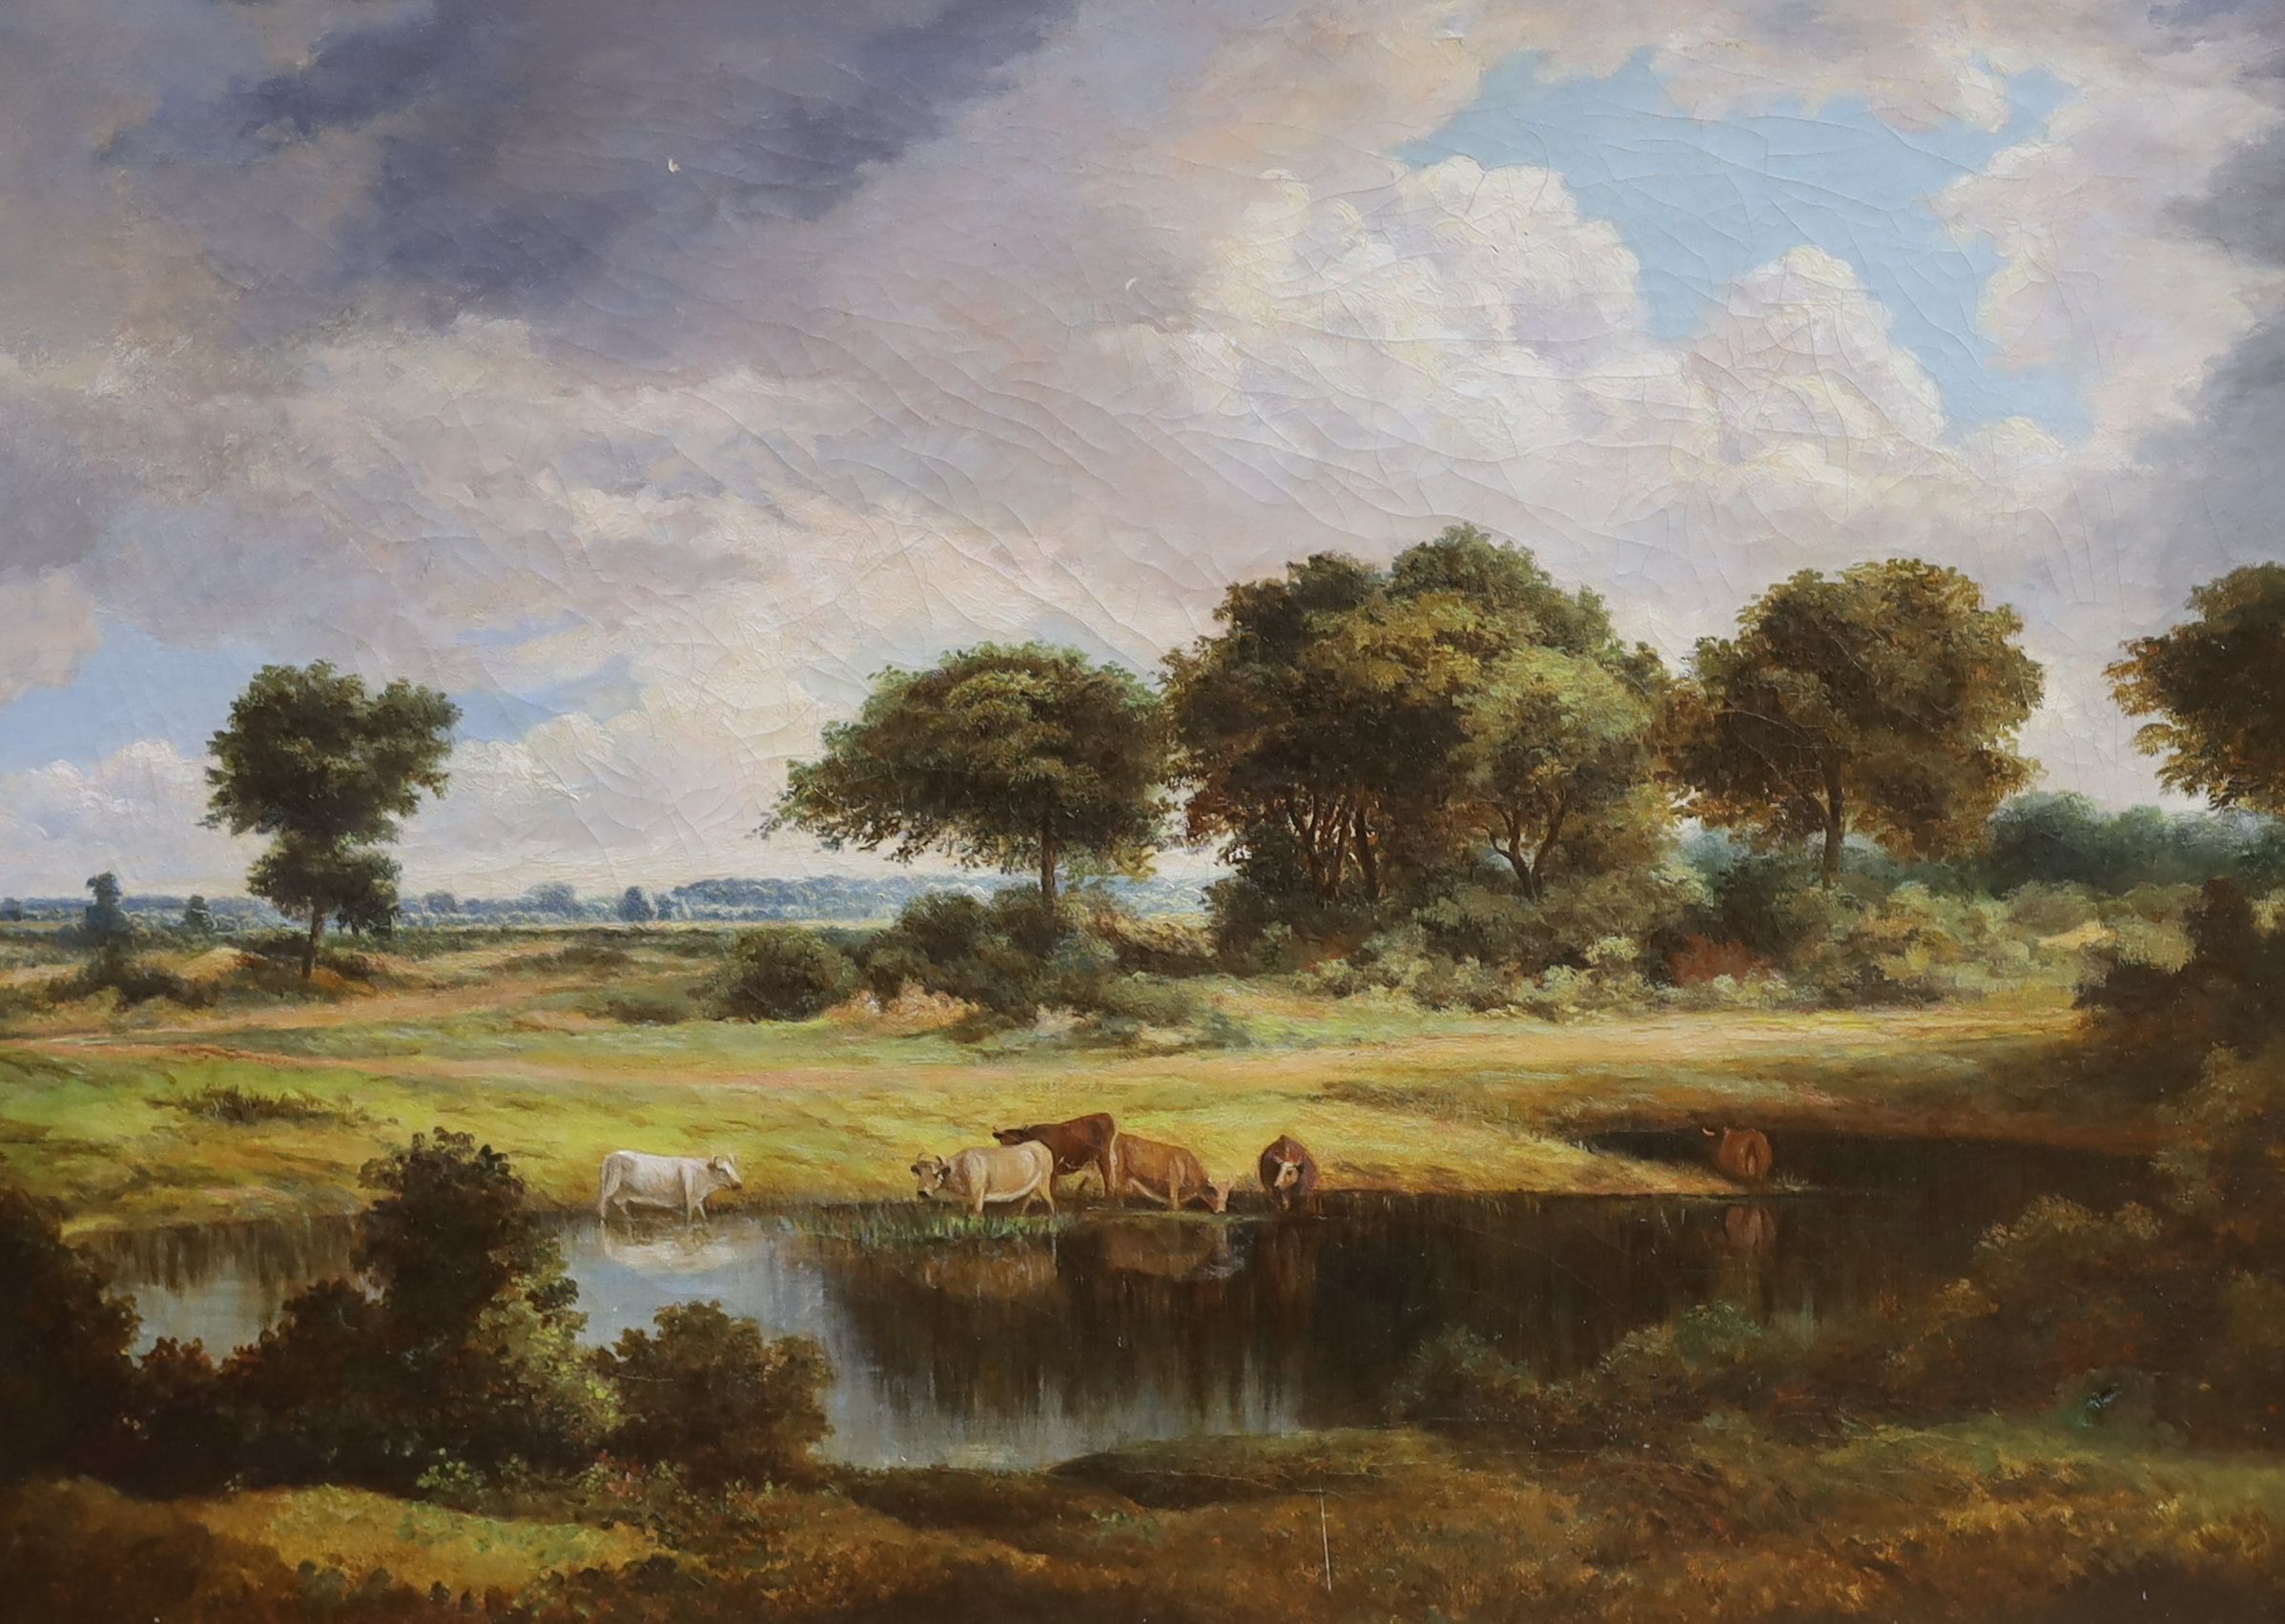 19th century English School, oil on canvas, Cattle watering in a landscape, 50 x 68cm